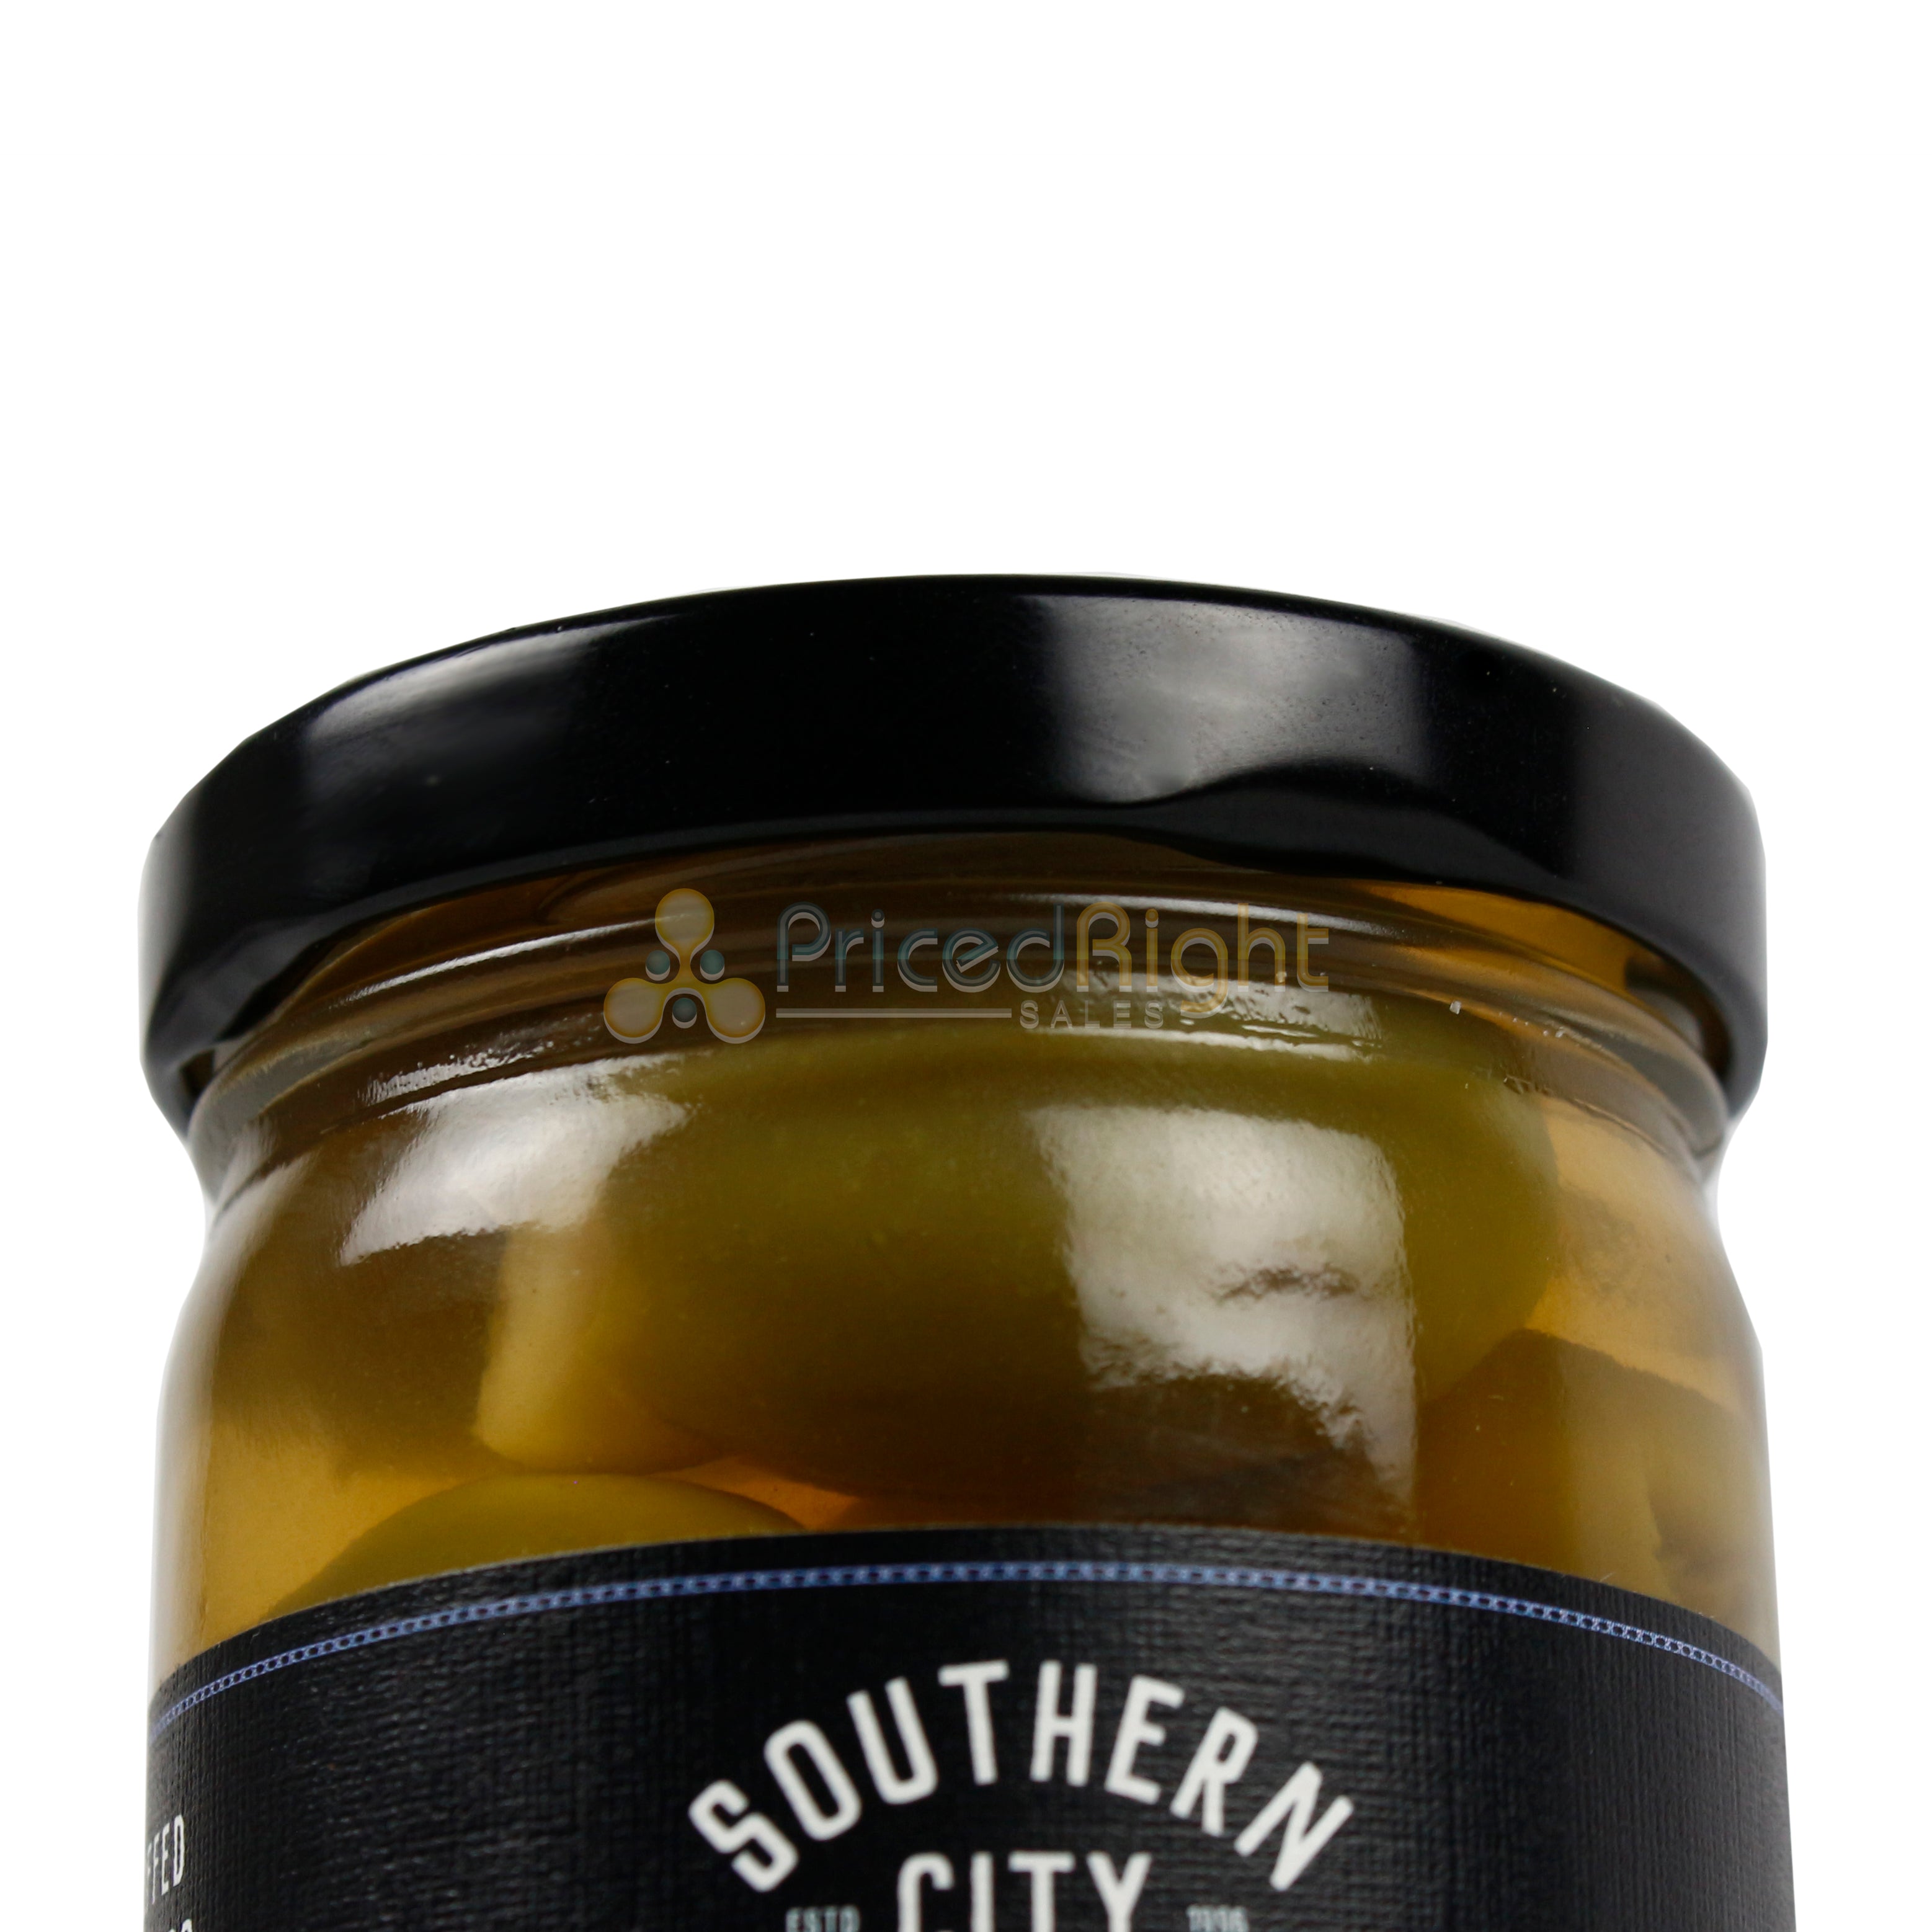 Southern City Flavors Garlic & Jalapeno Pitted Stuffed Olives Made In The USA